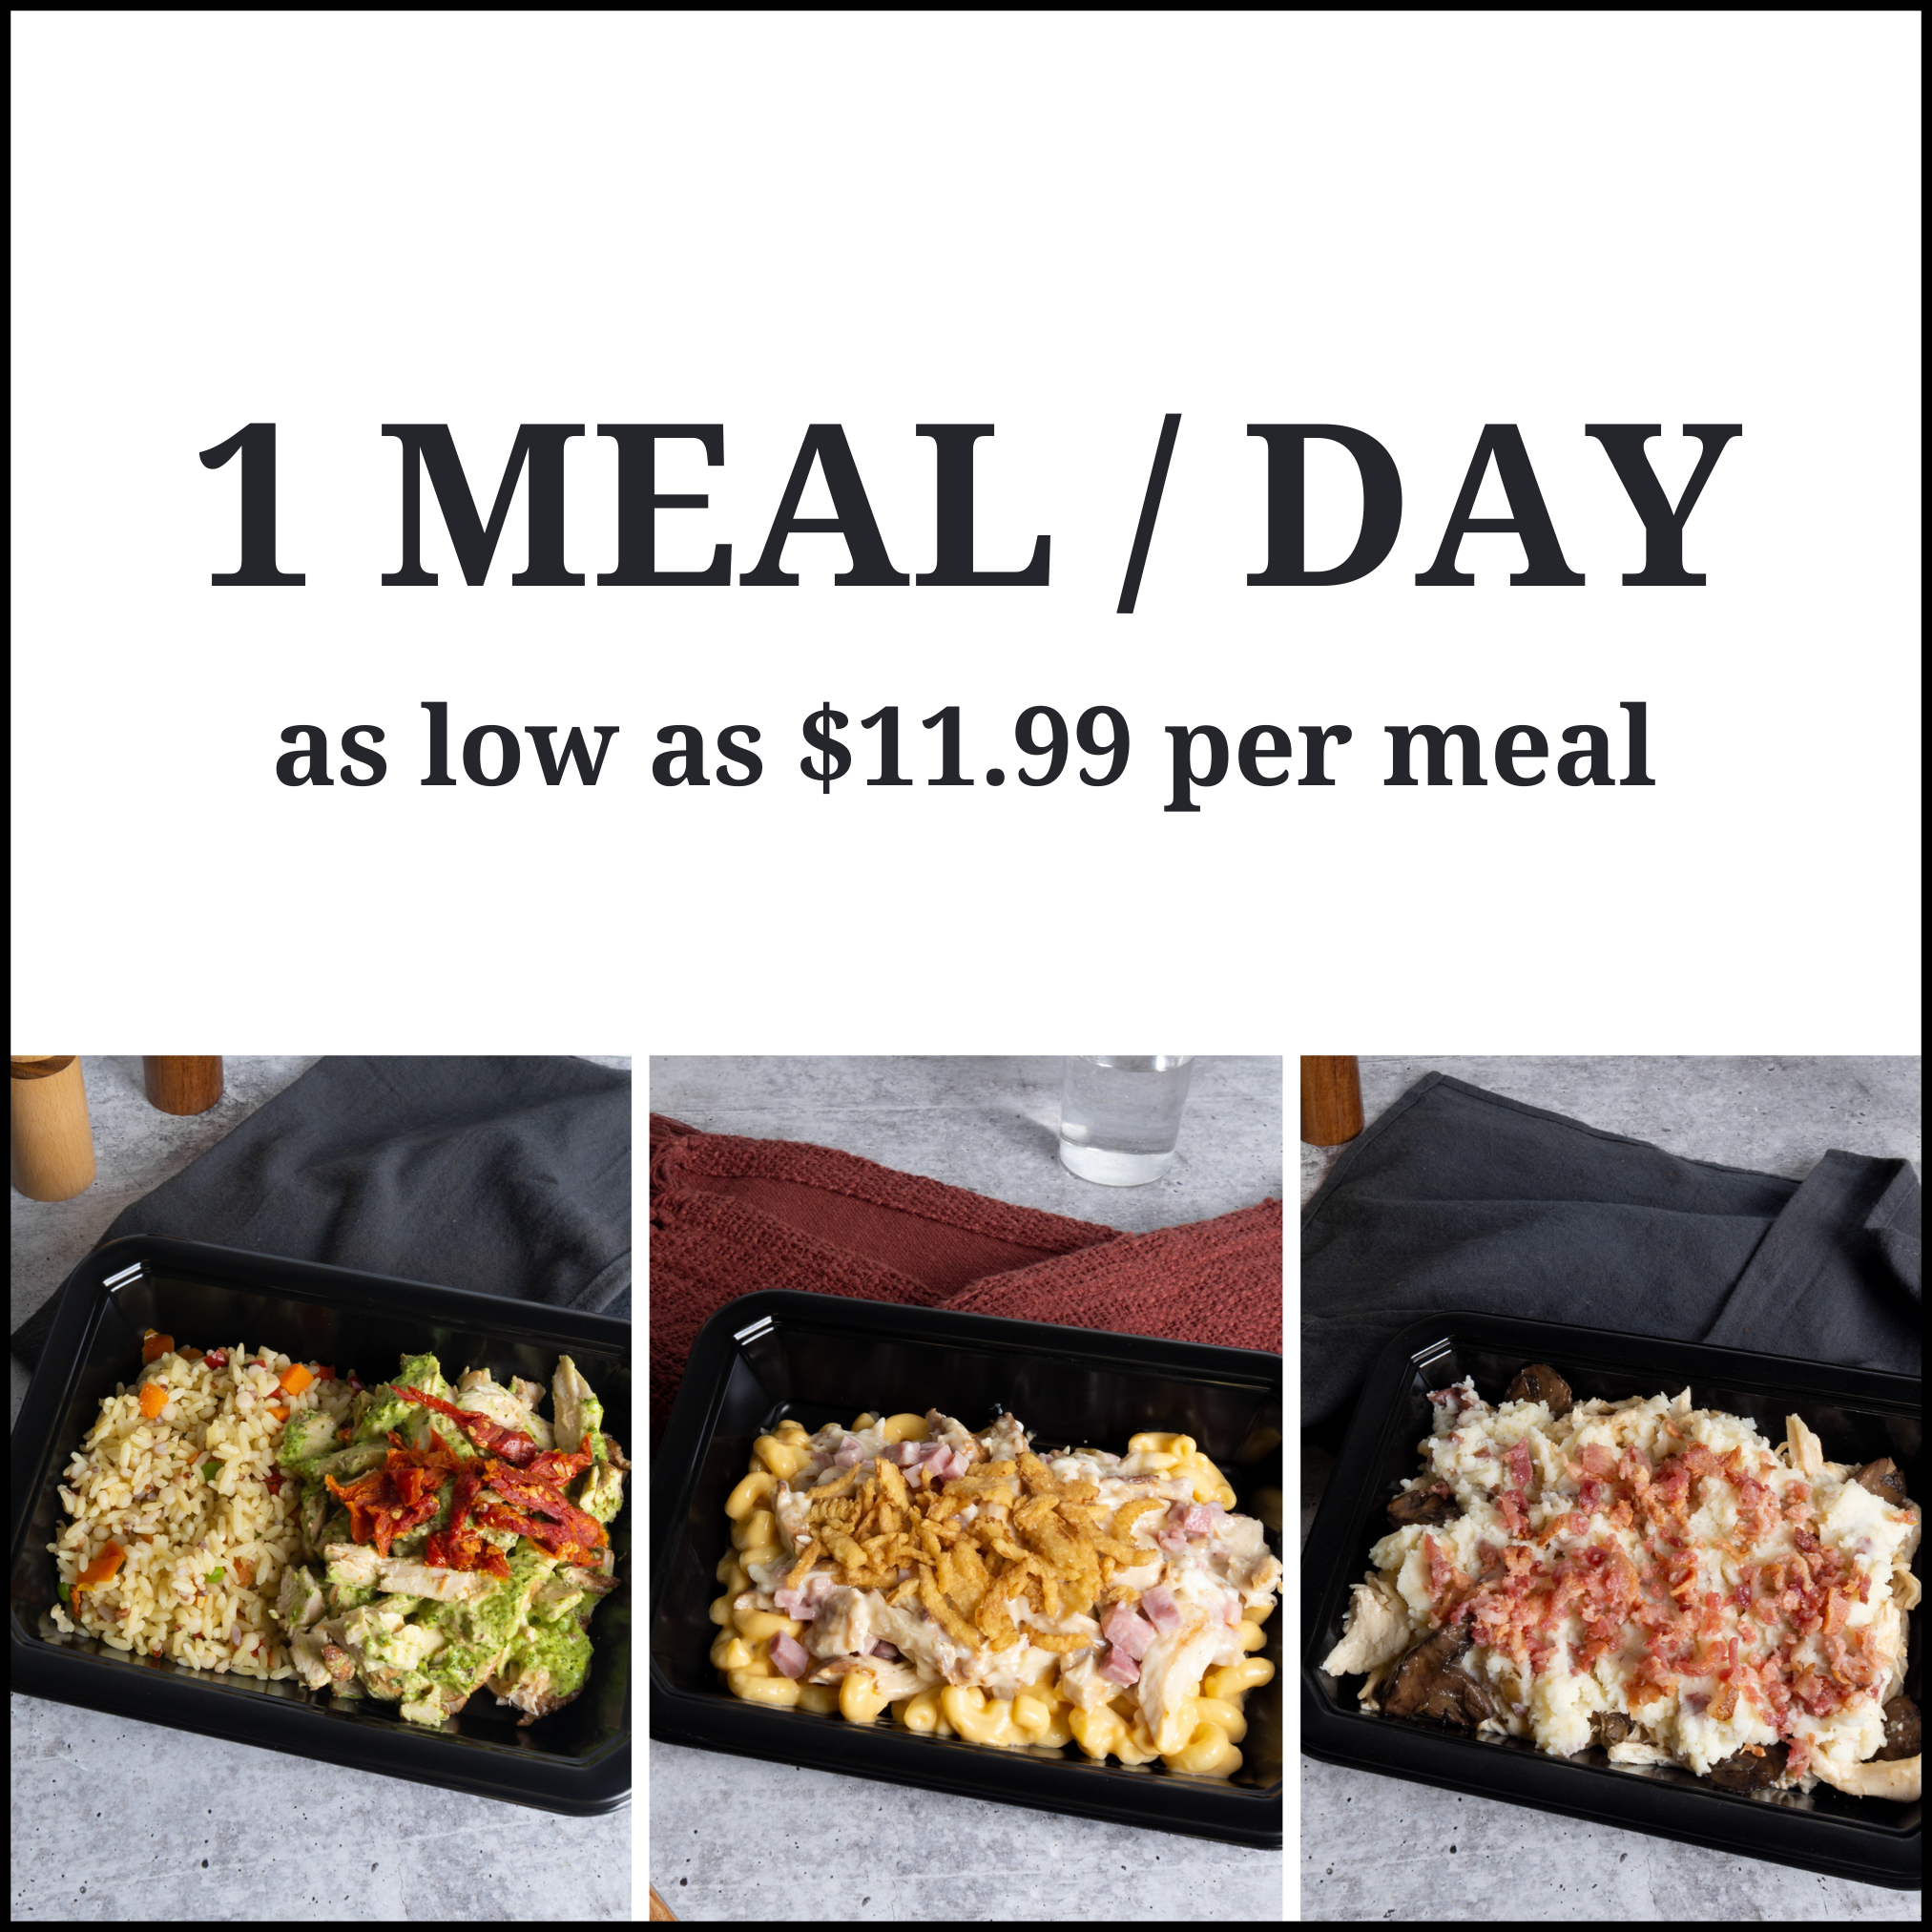 Mon - 1 Meal / Day